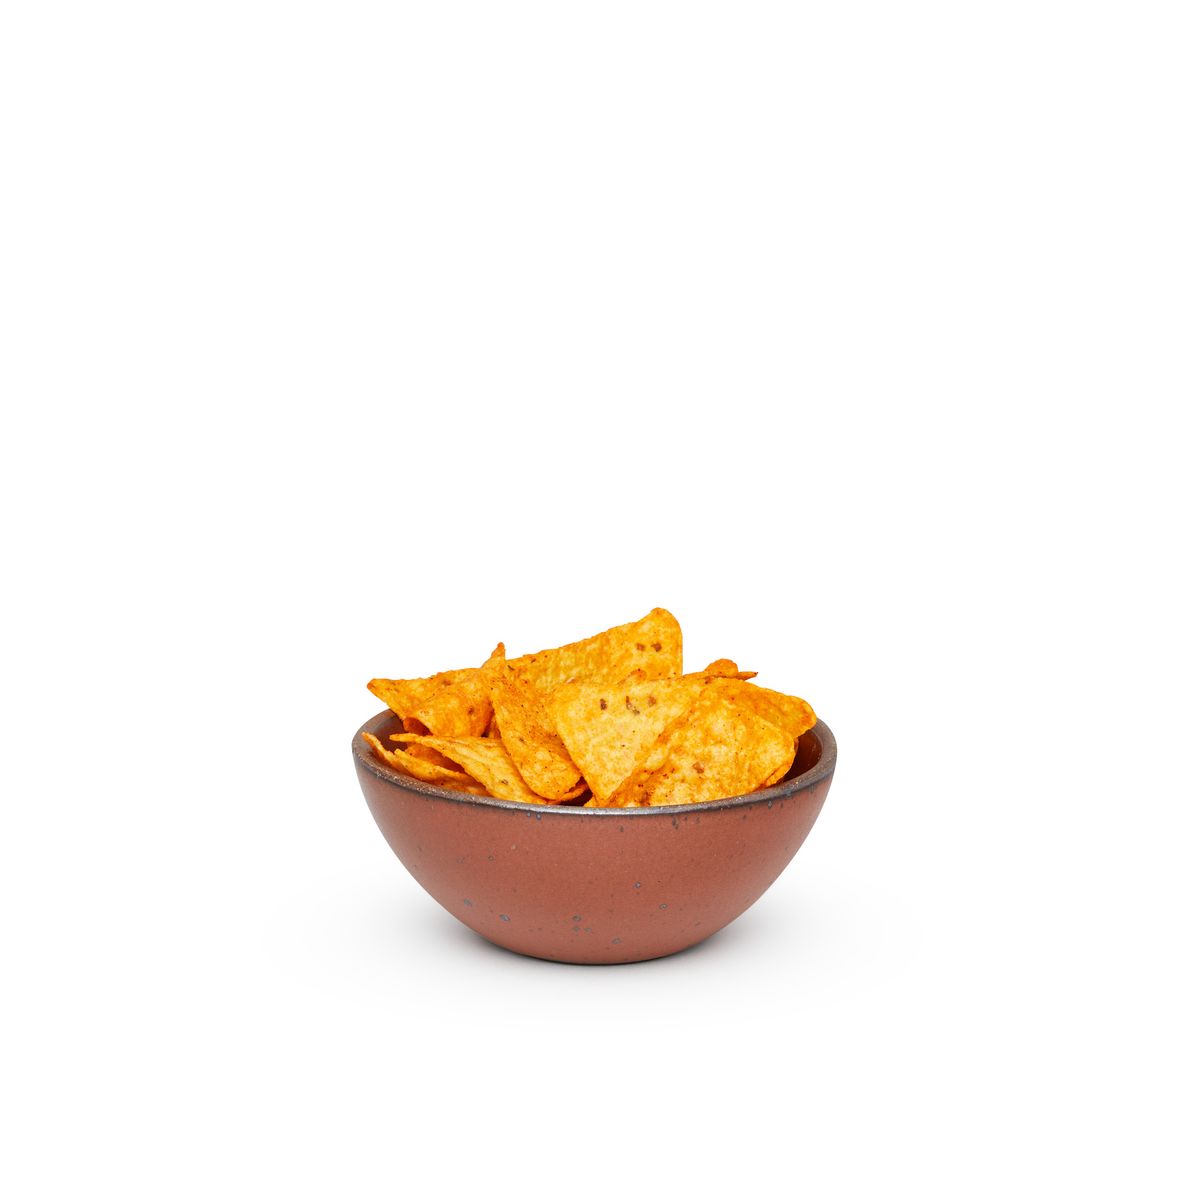 A small dessert sized rounded ceramic bowl in a cool burnt terracotta color featuring iron speckles and an unglazed rim, filled with nacho cheese flavored chips